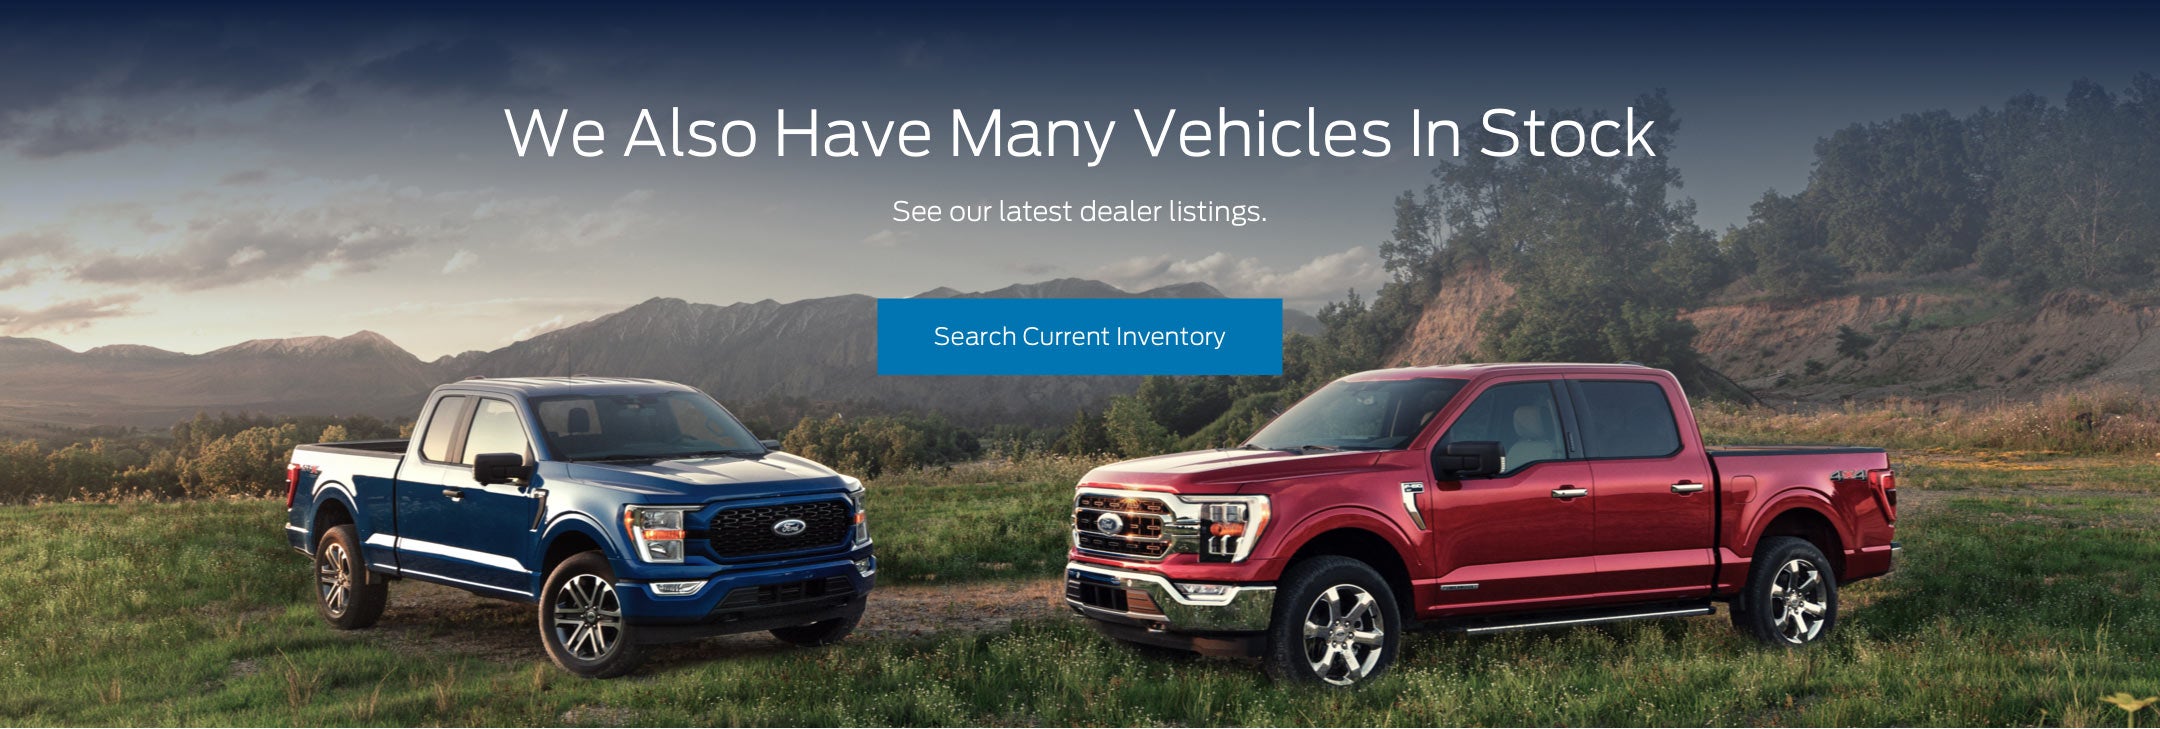 Ford vehicles in stock | Gray-Daniels Ford in Brandon MS